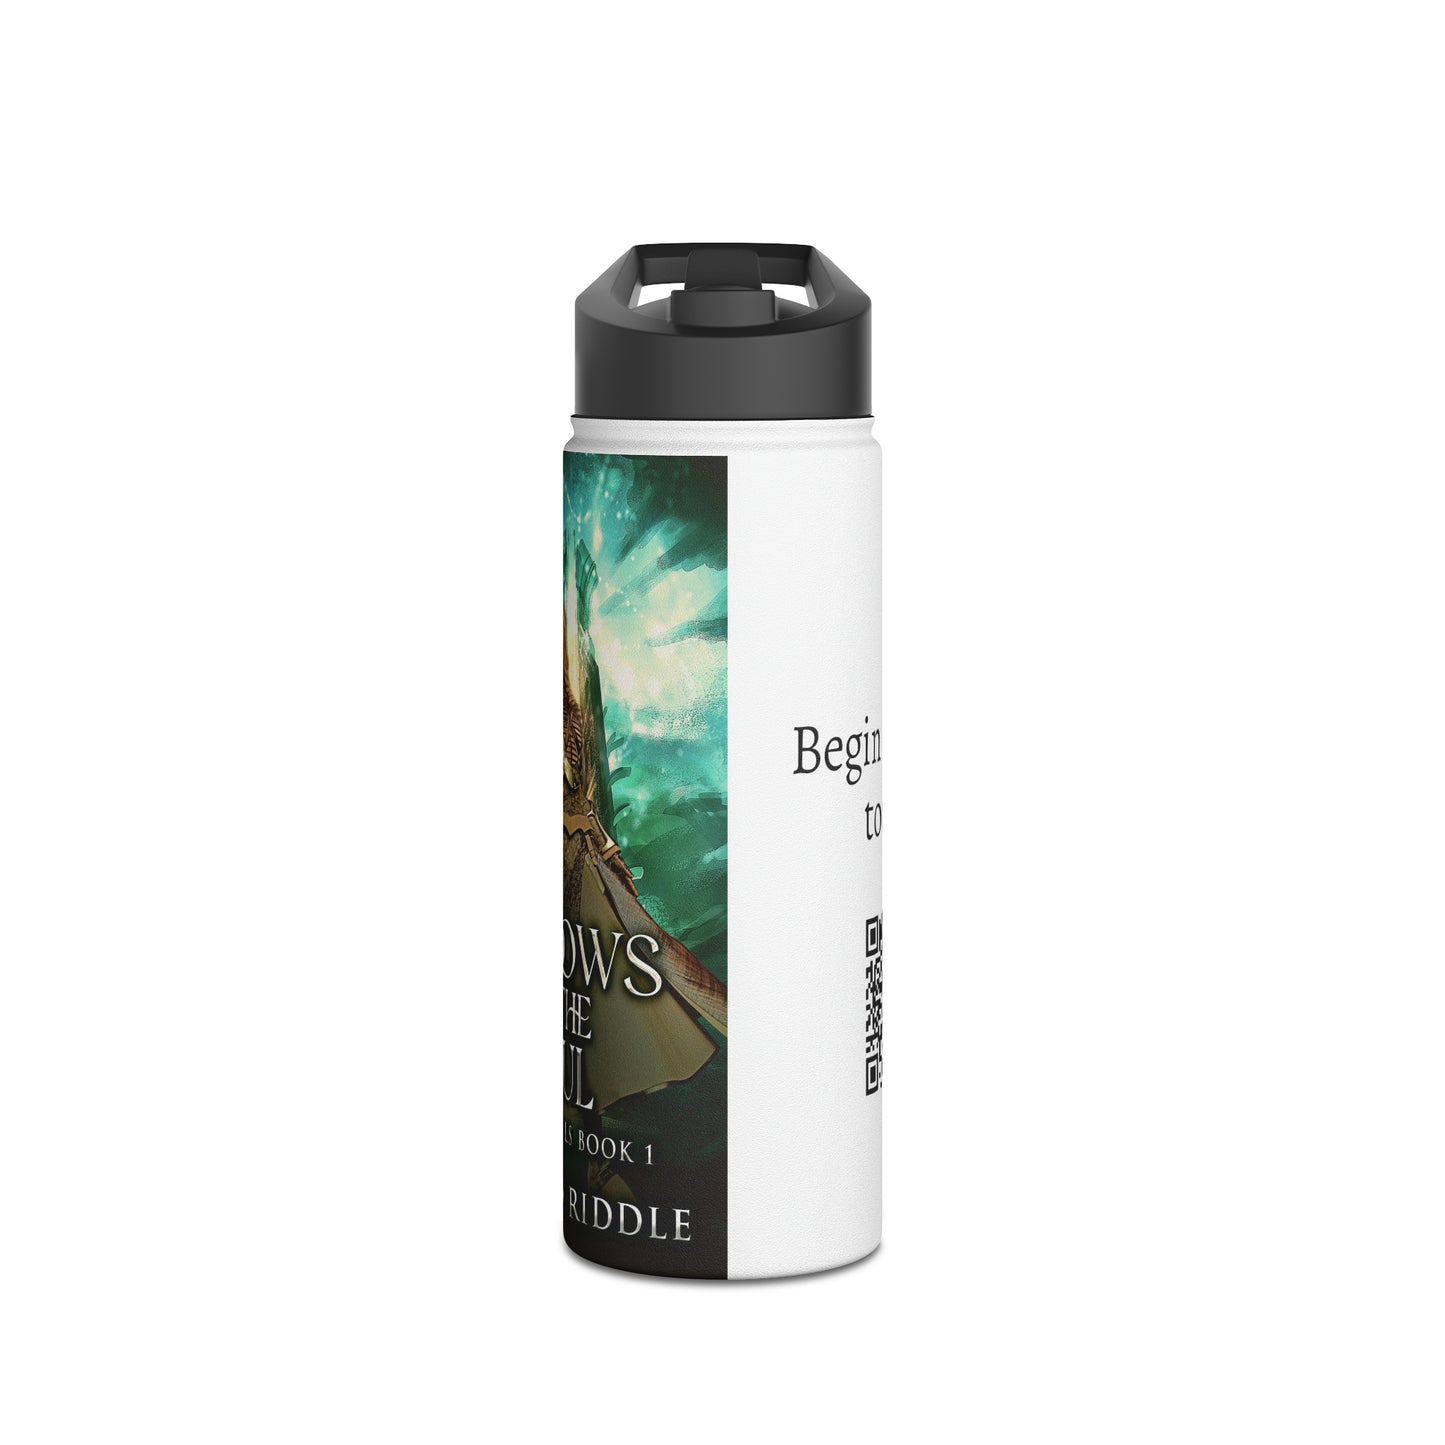 Shadows Of The Soul - Stainless Steel Water Bottle